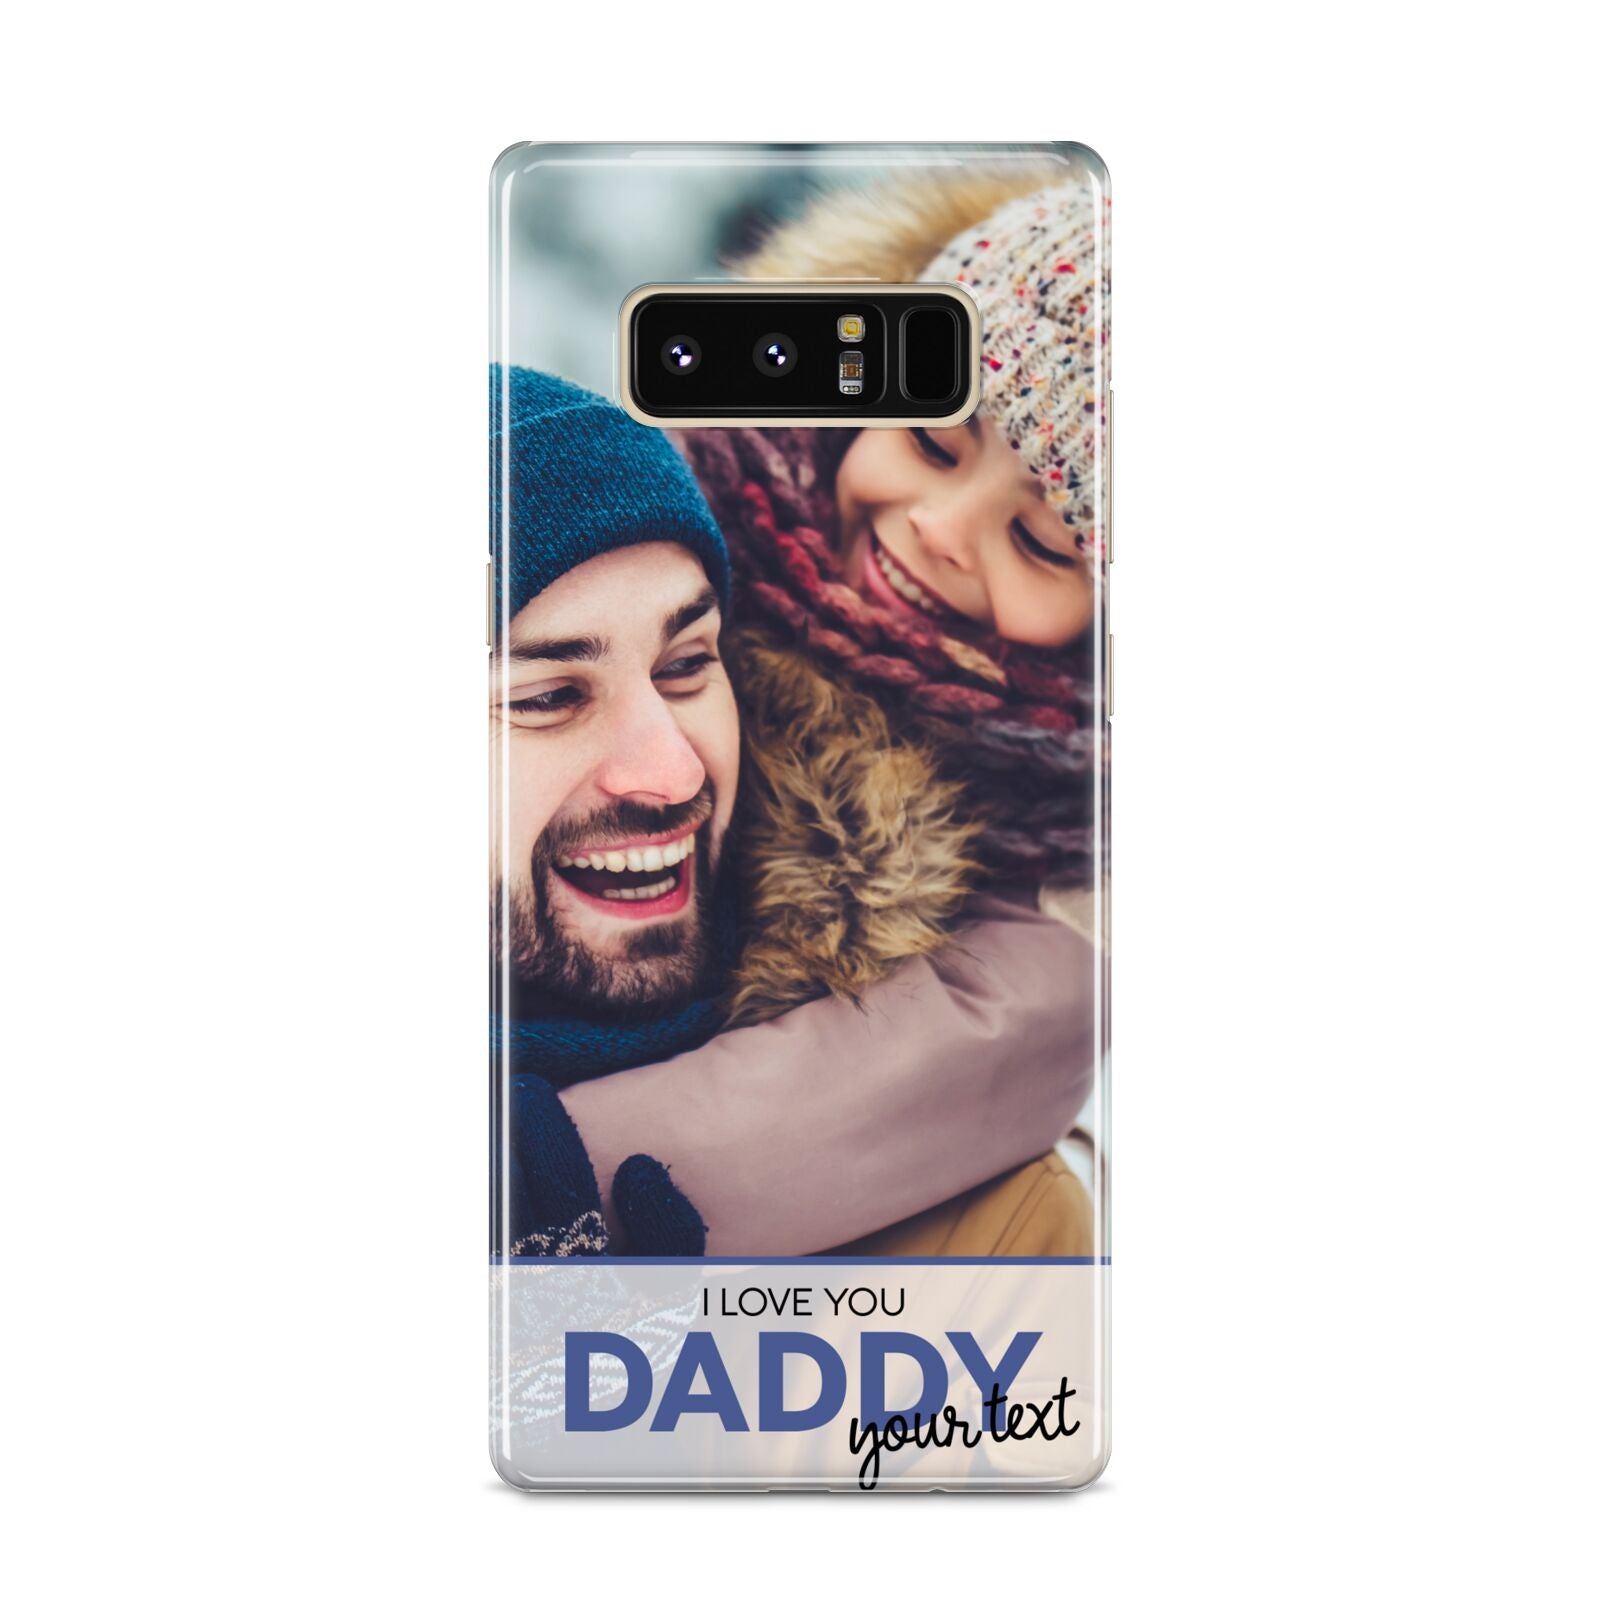 I Love You Daddy Personalised Photo Upload and Name Samsung Galaxy S8 Case